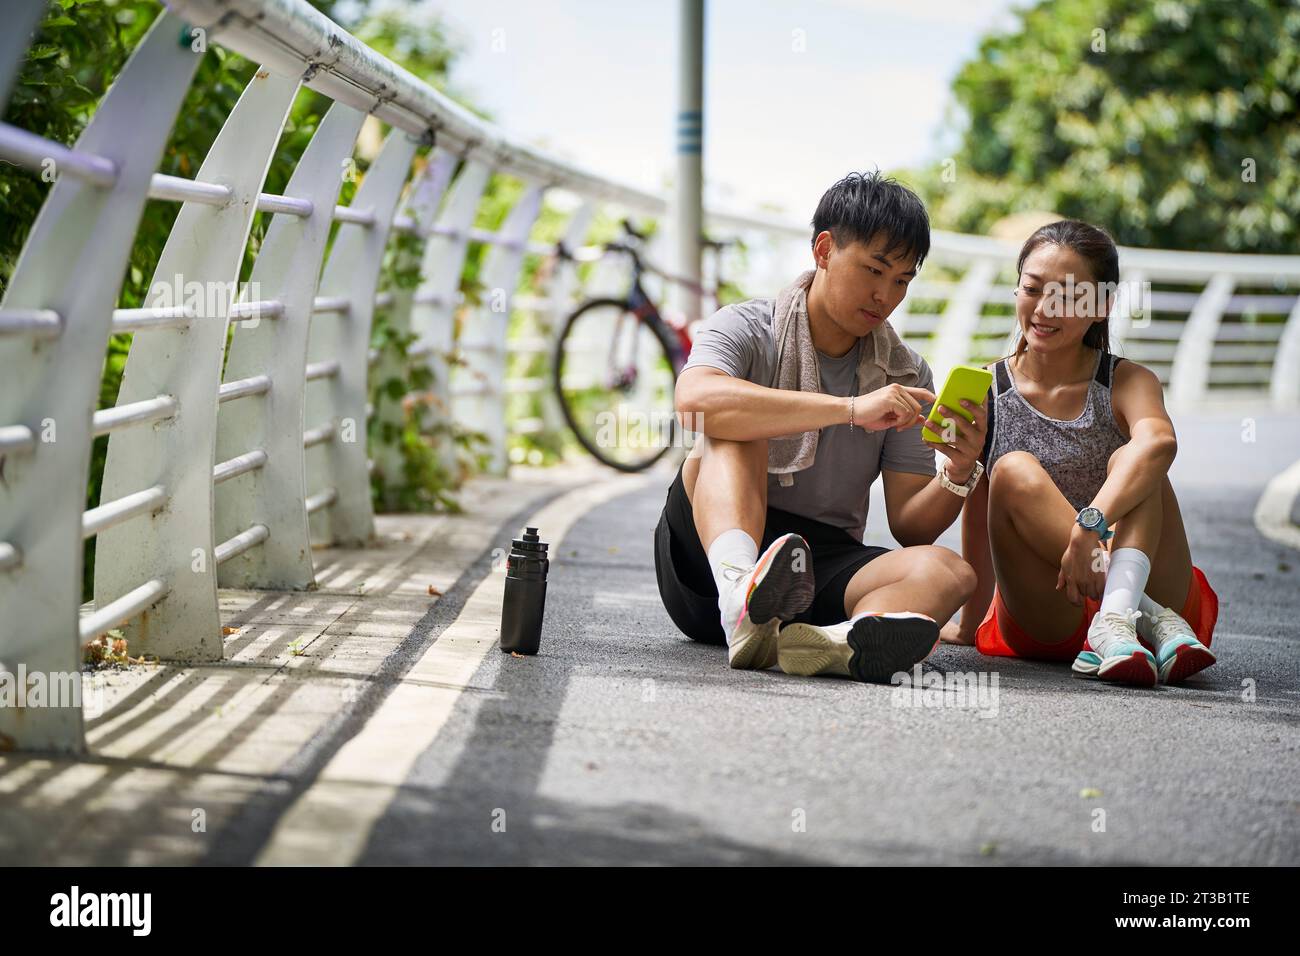 young asian couple sharing cellphone photos while taking a break during outdoor exercise Stock Photo